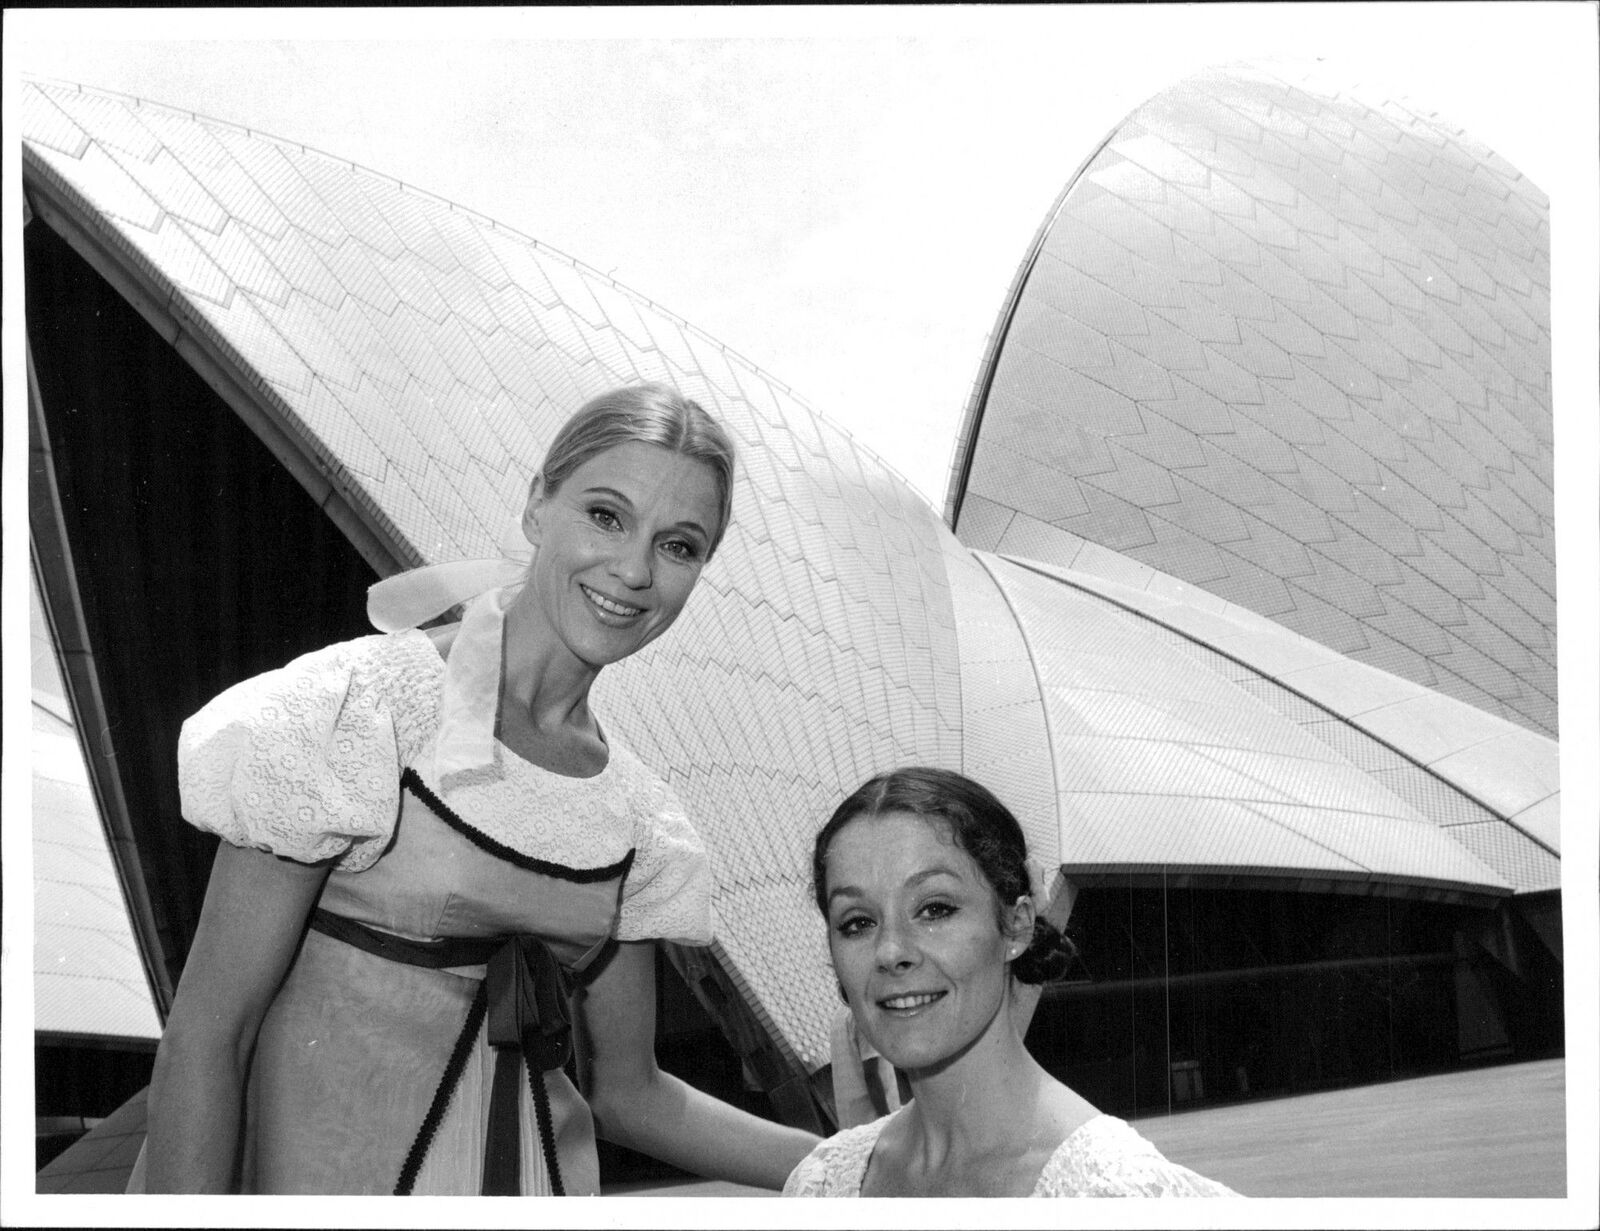 Gerd Andersson and Maria Lang outside the Sydne... - Vintage Photograph 679563